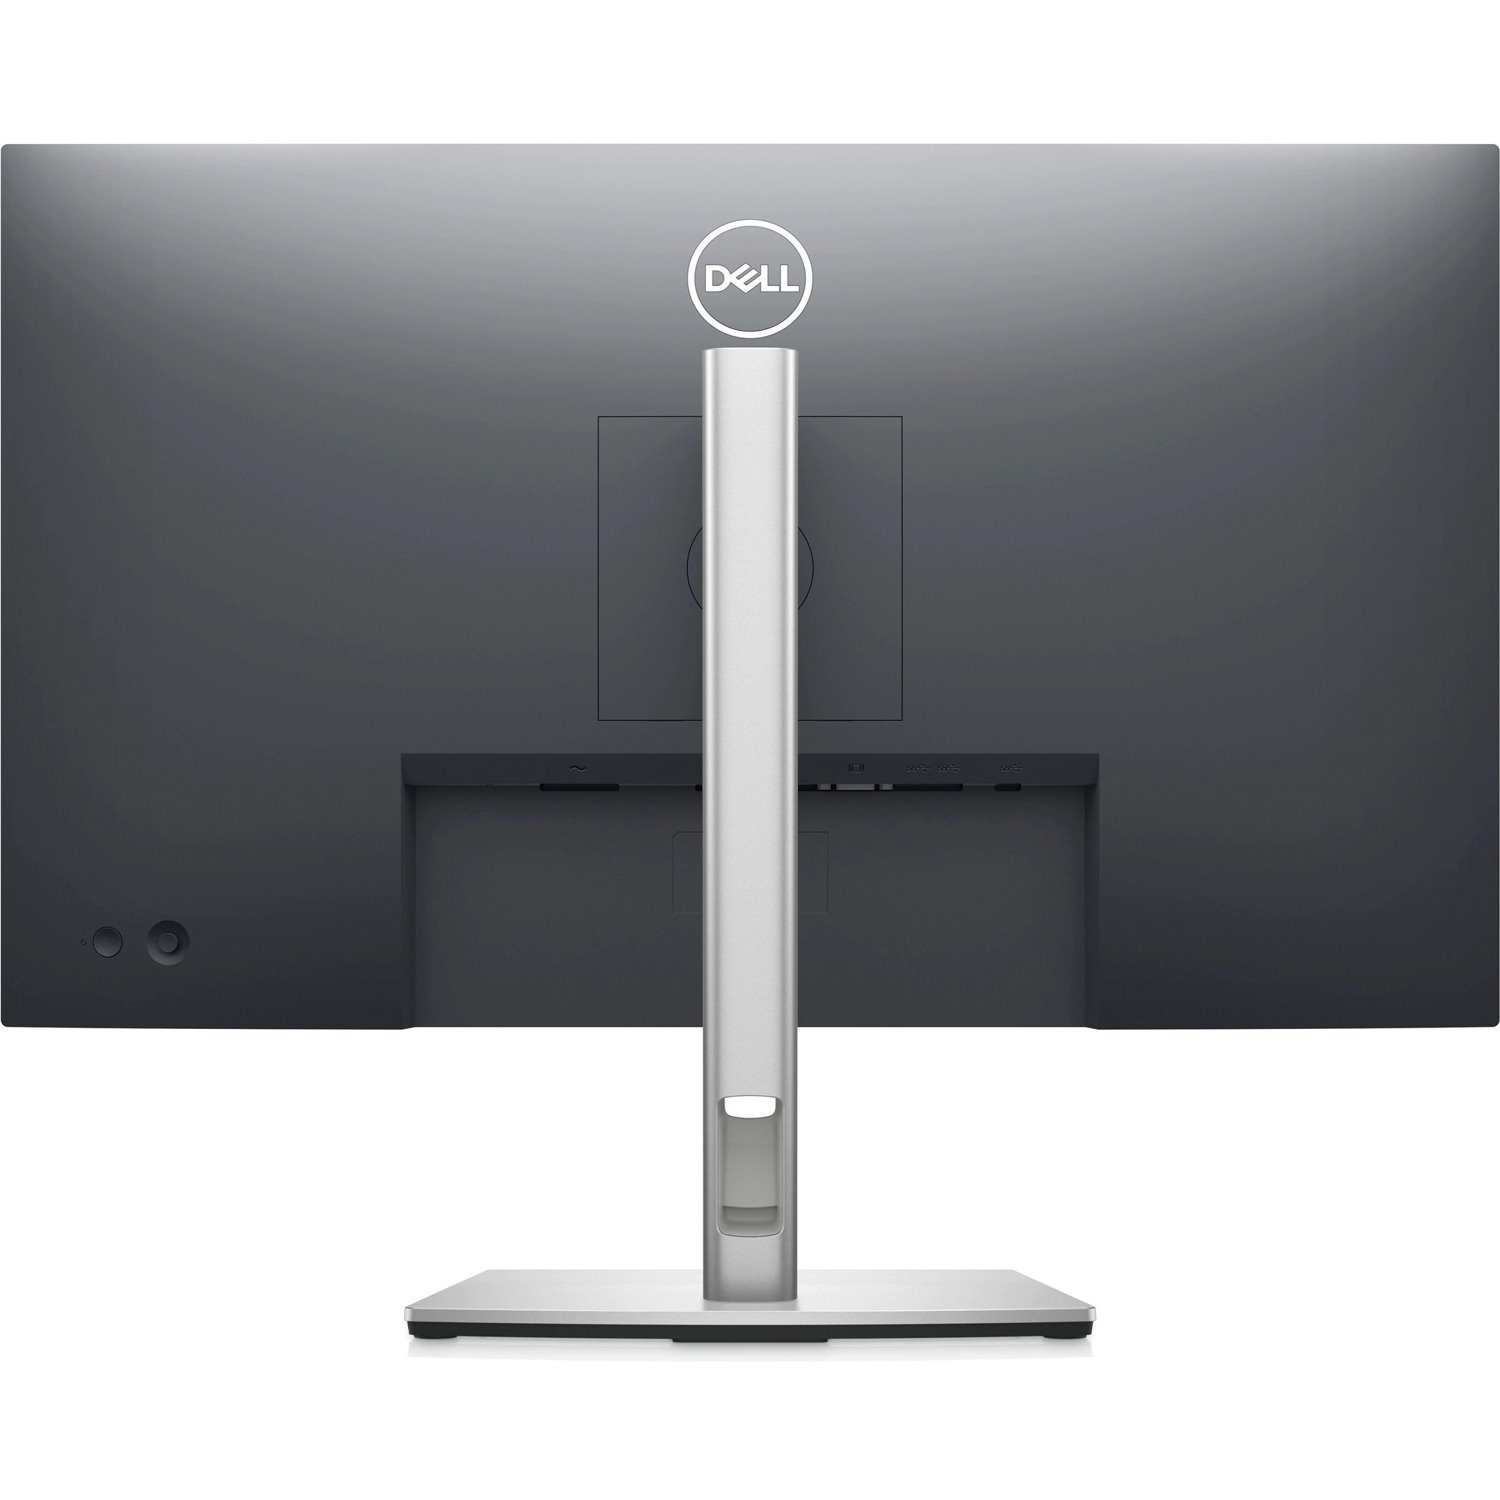 Dell P2722HE 68.6 cm (27") LED LCD Monitor